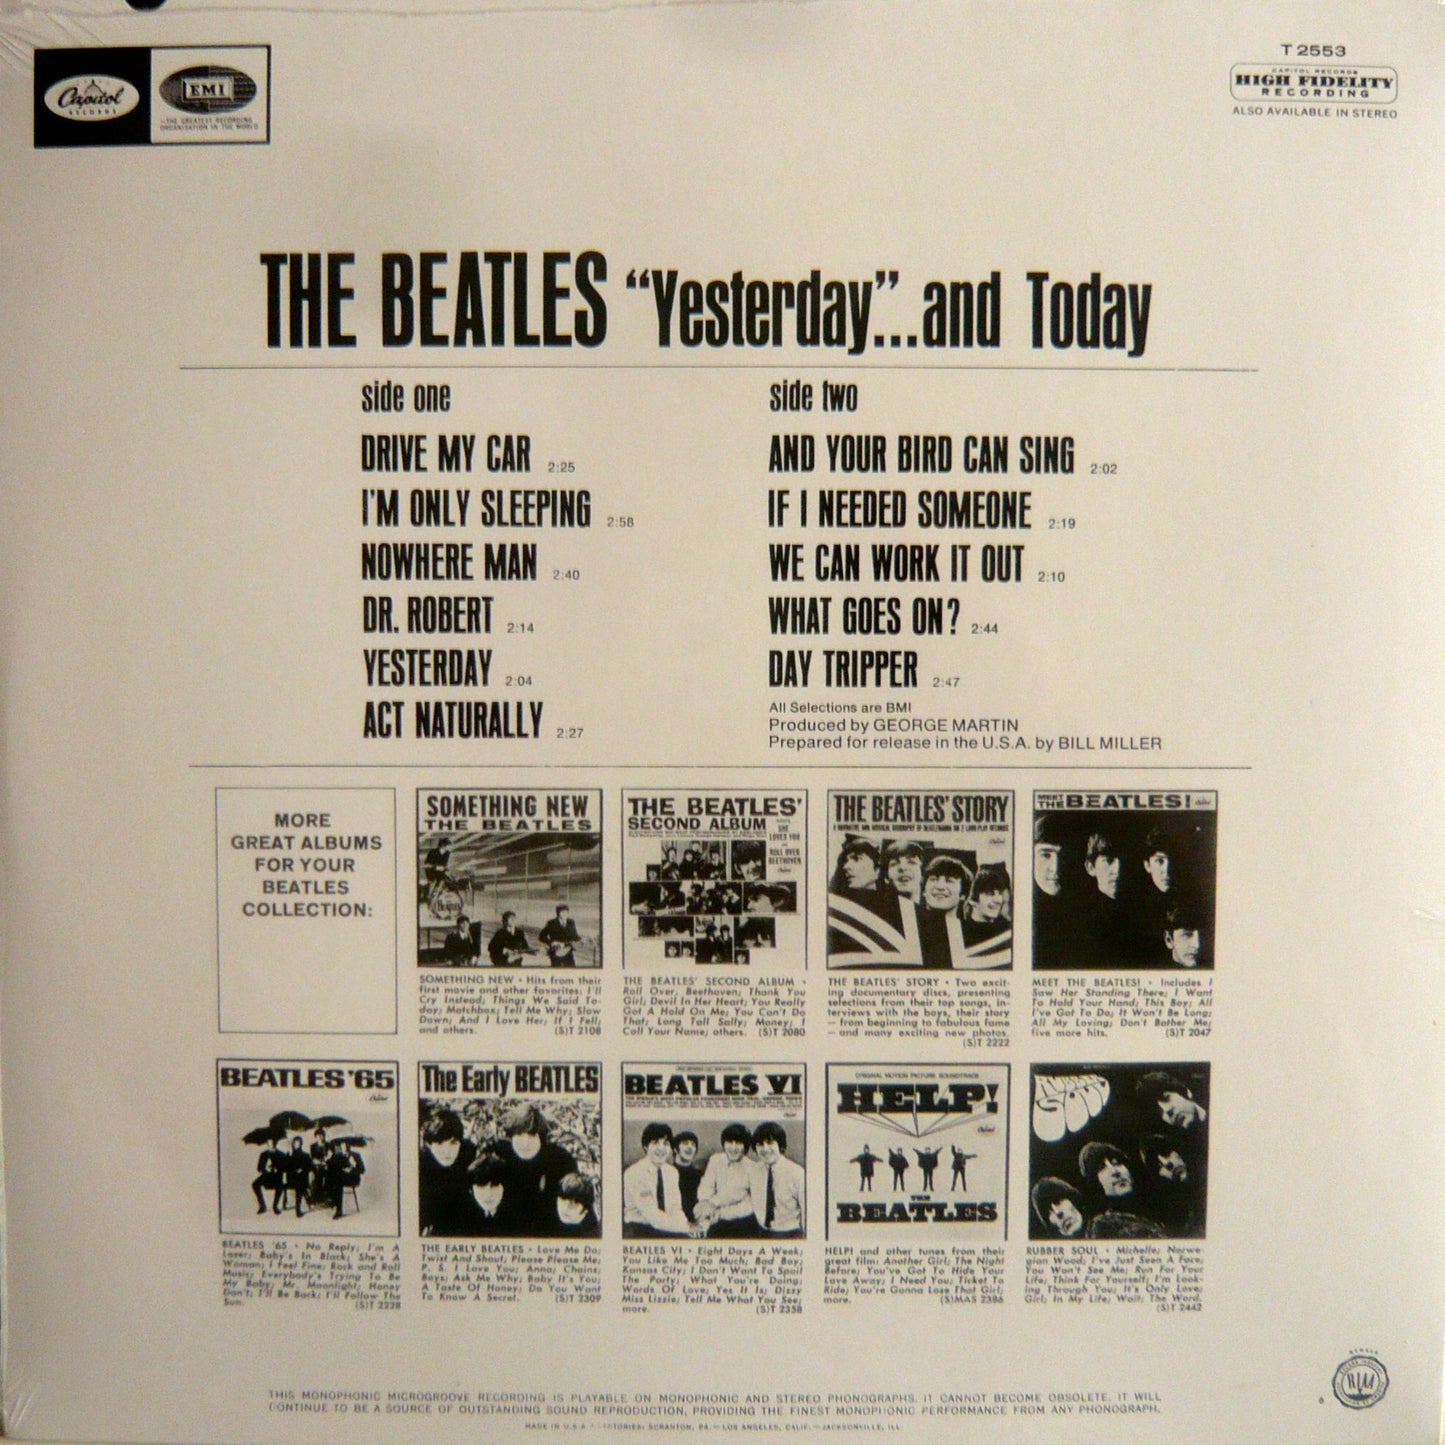 Beatles - Yesterday And Today.